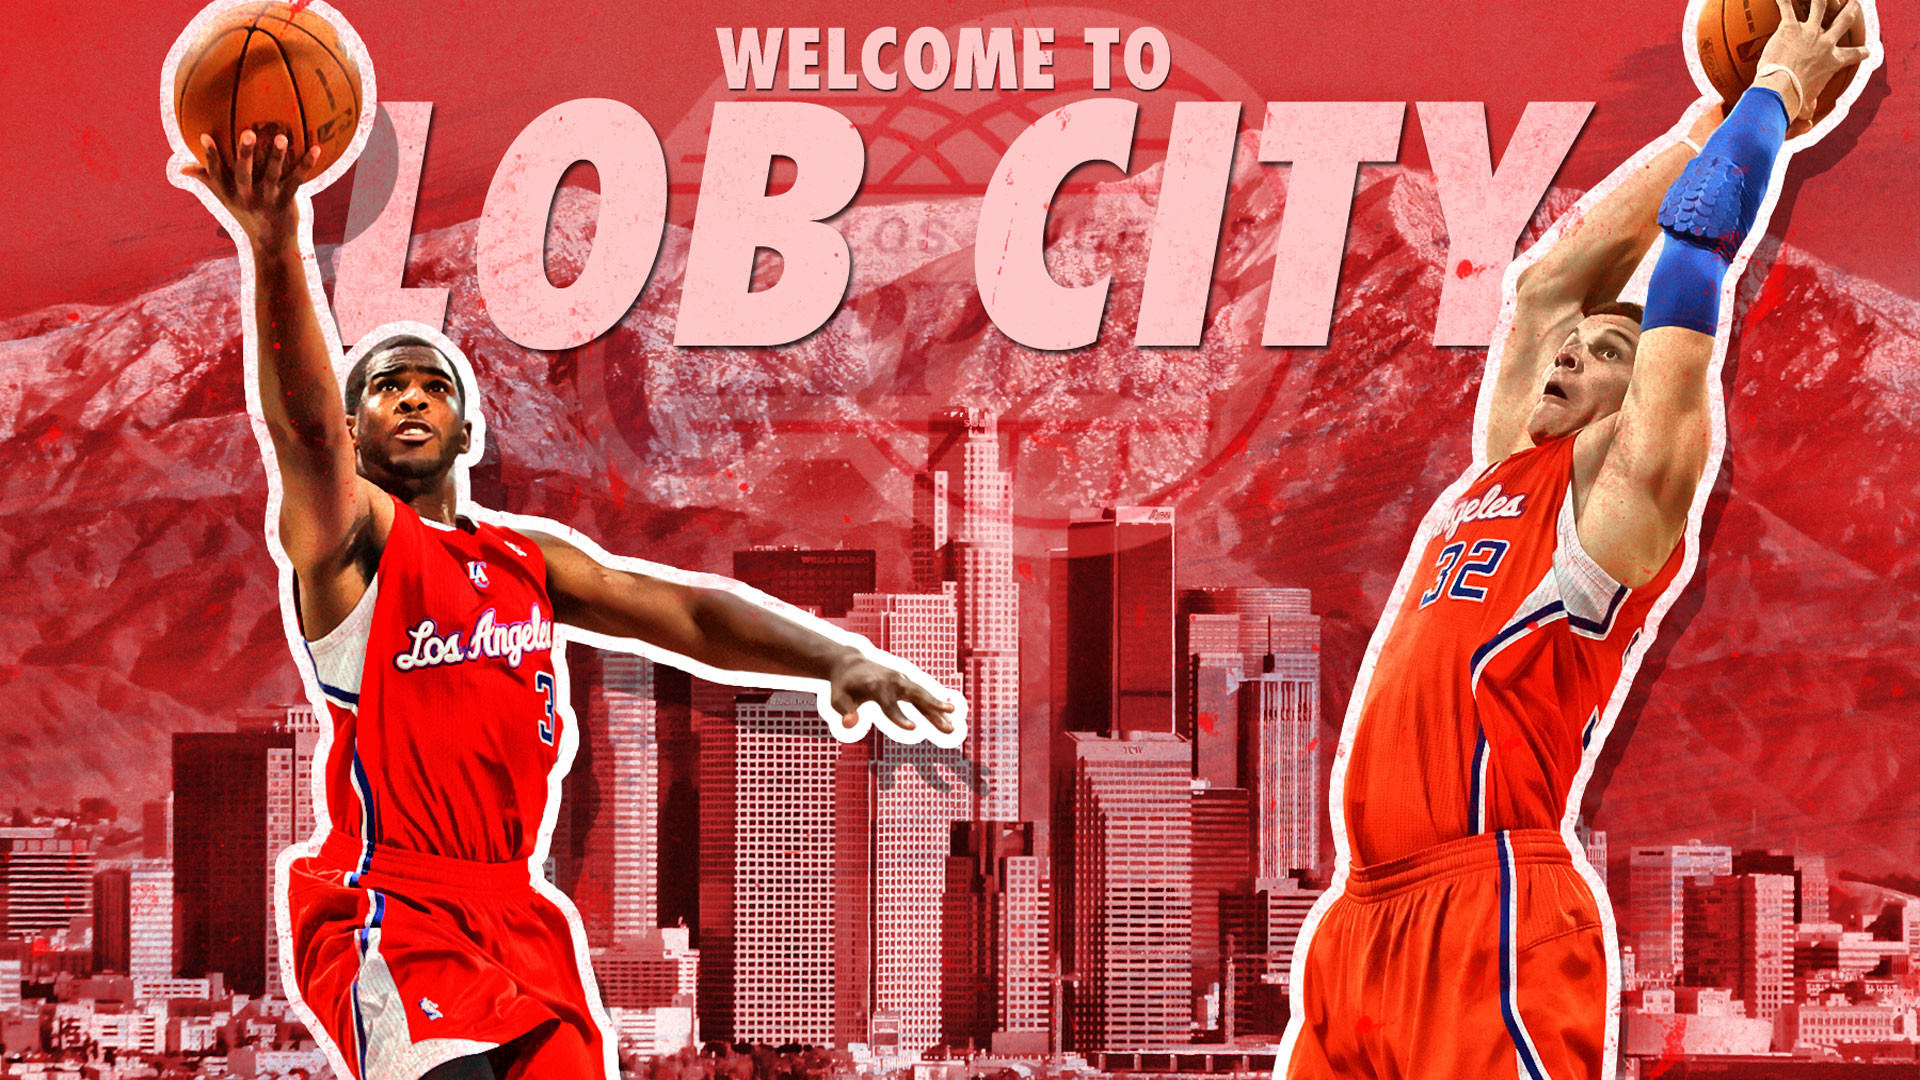 Los Angeles Clippers Wallpapers Clippers 2012 Welcome To Lob City Wallpaper 1920x1080